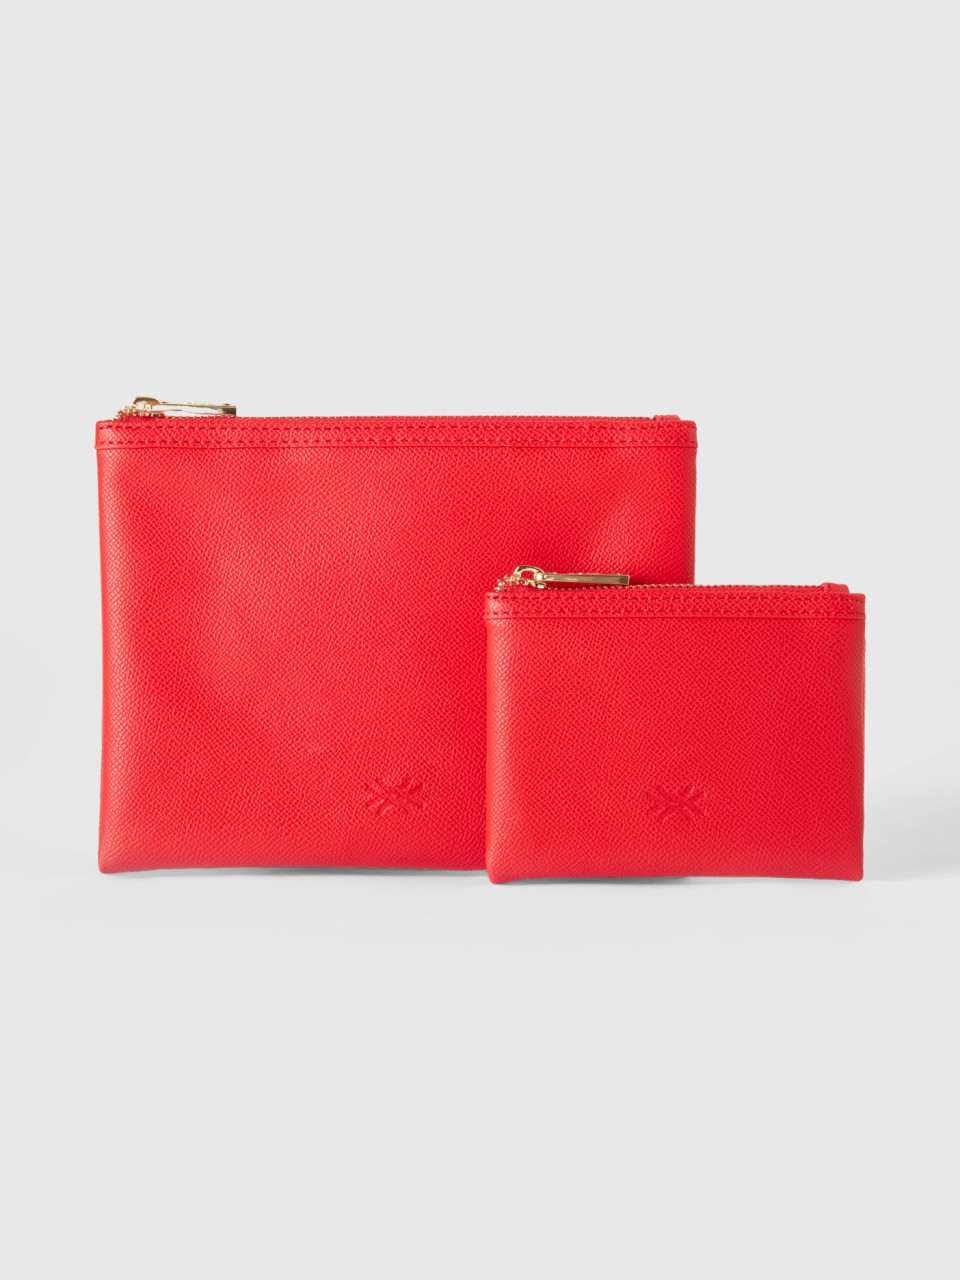 Benetton, Two Red Bags, Red, Women